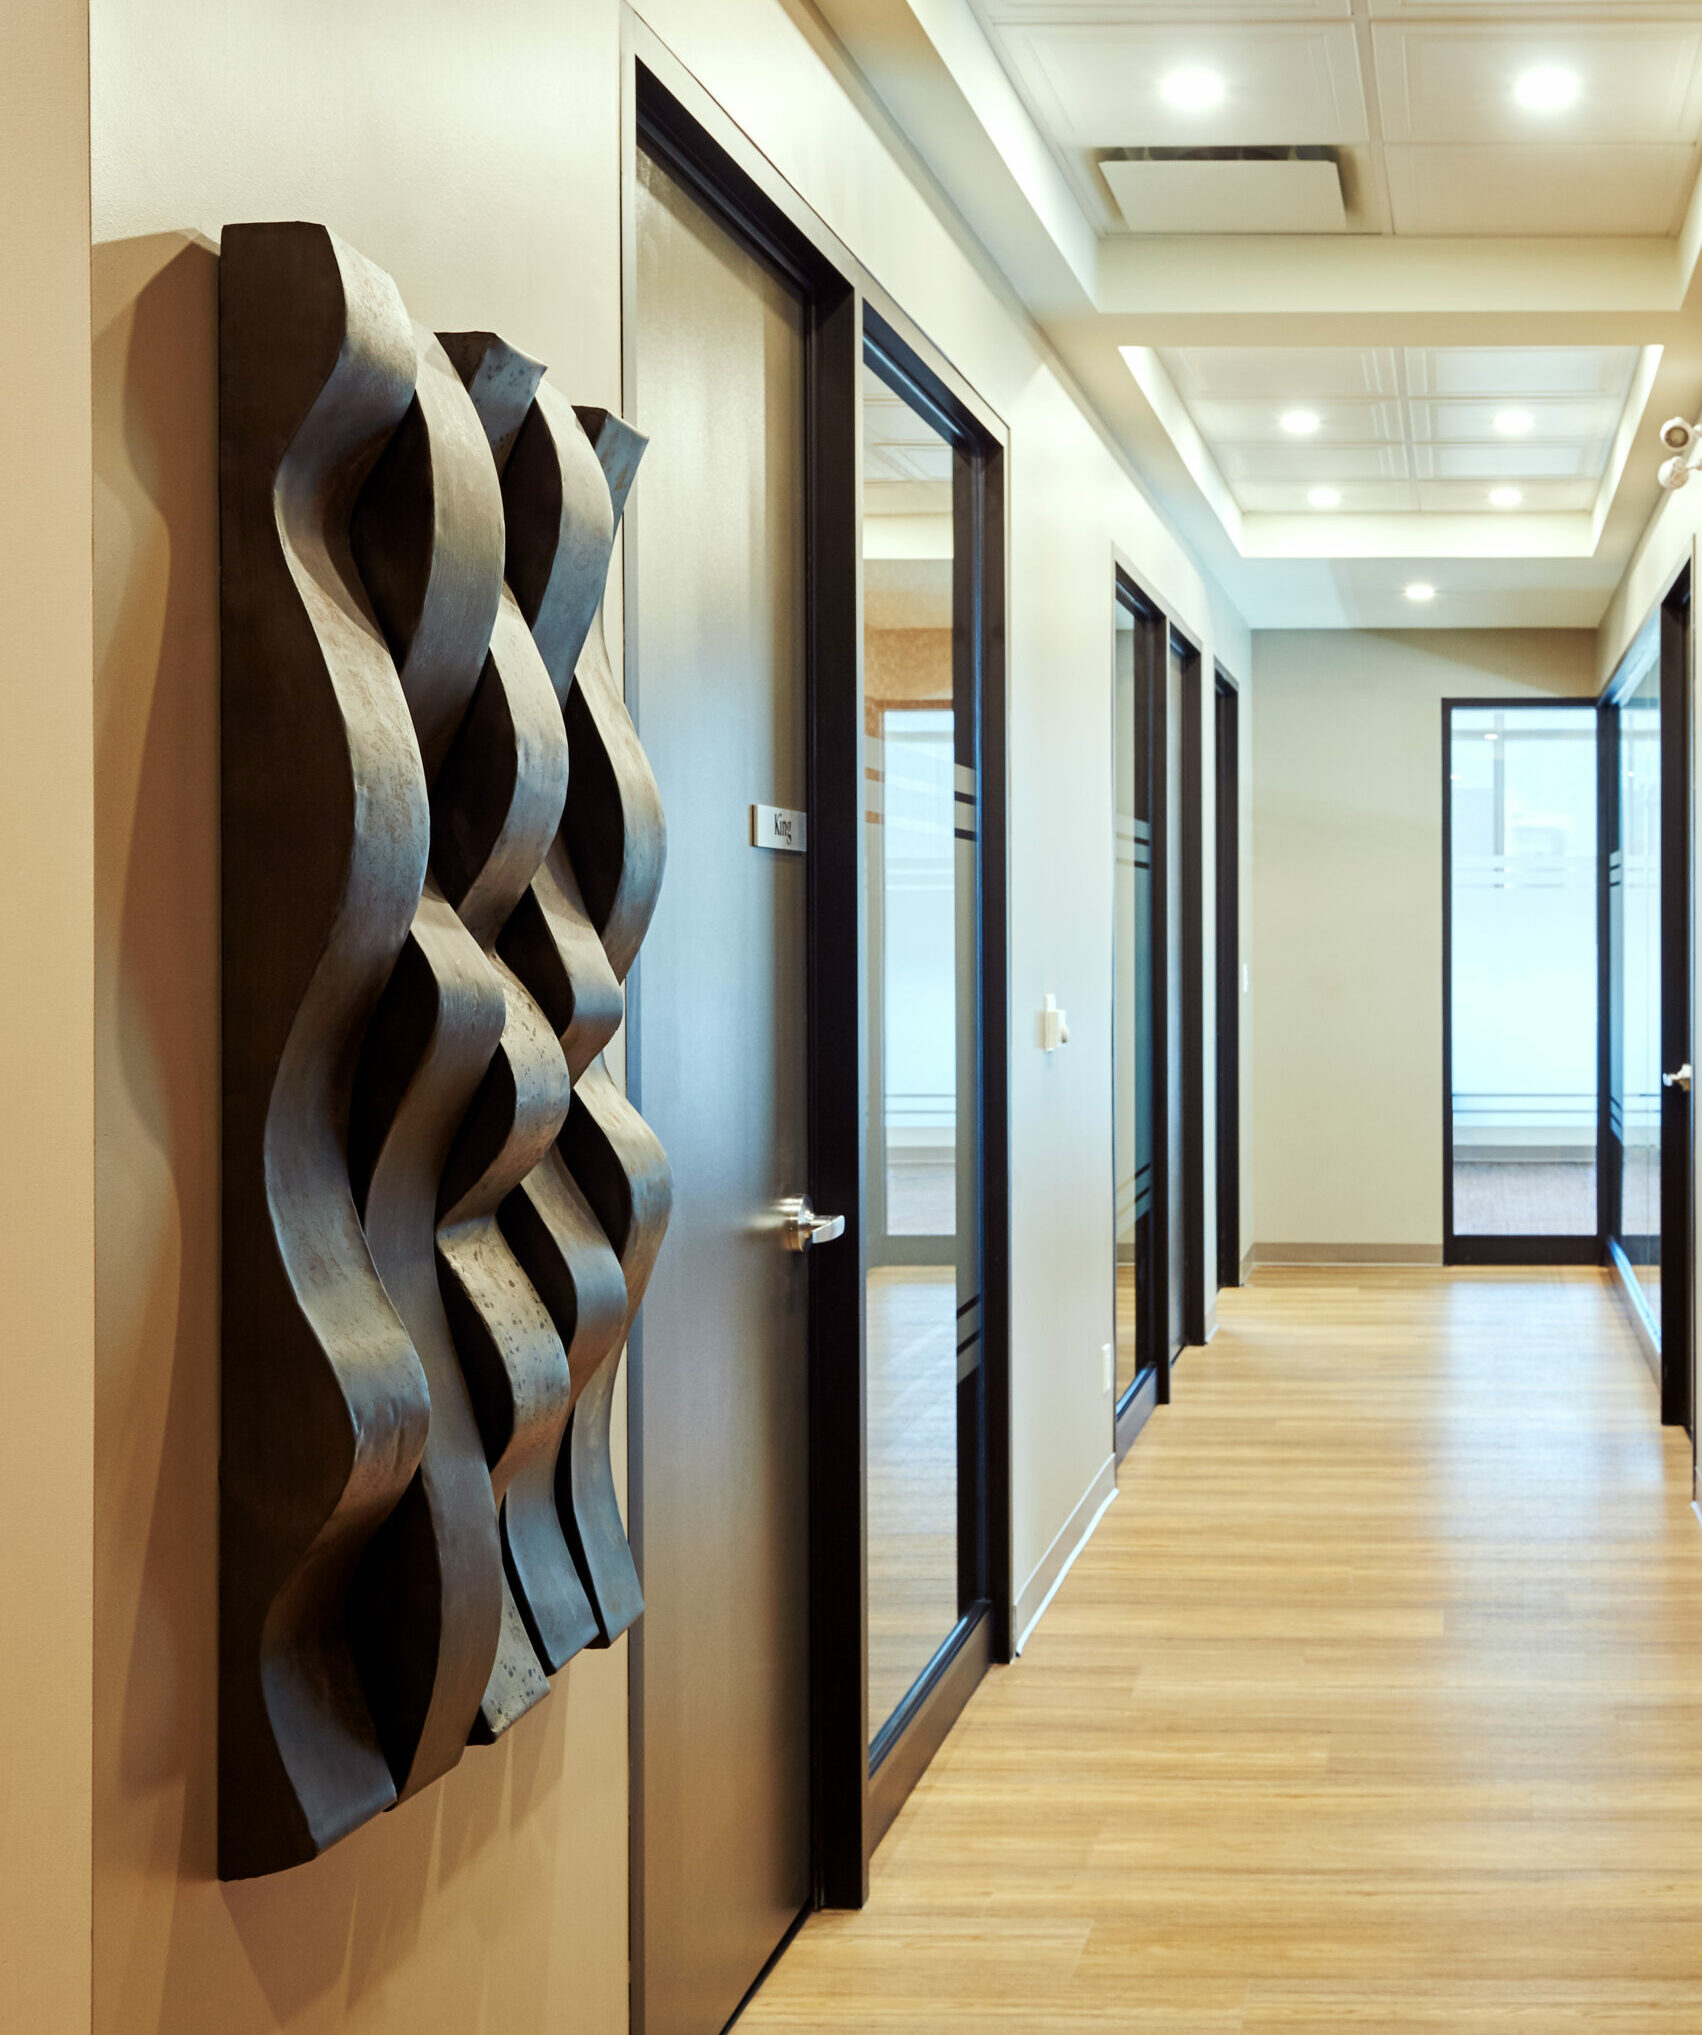 Our law firm, located in Hamilton, Ontario, showcases a contemporary hallway adorned with an artistic wall sculpture and multiple office entrances.